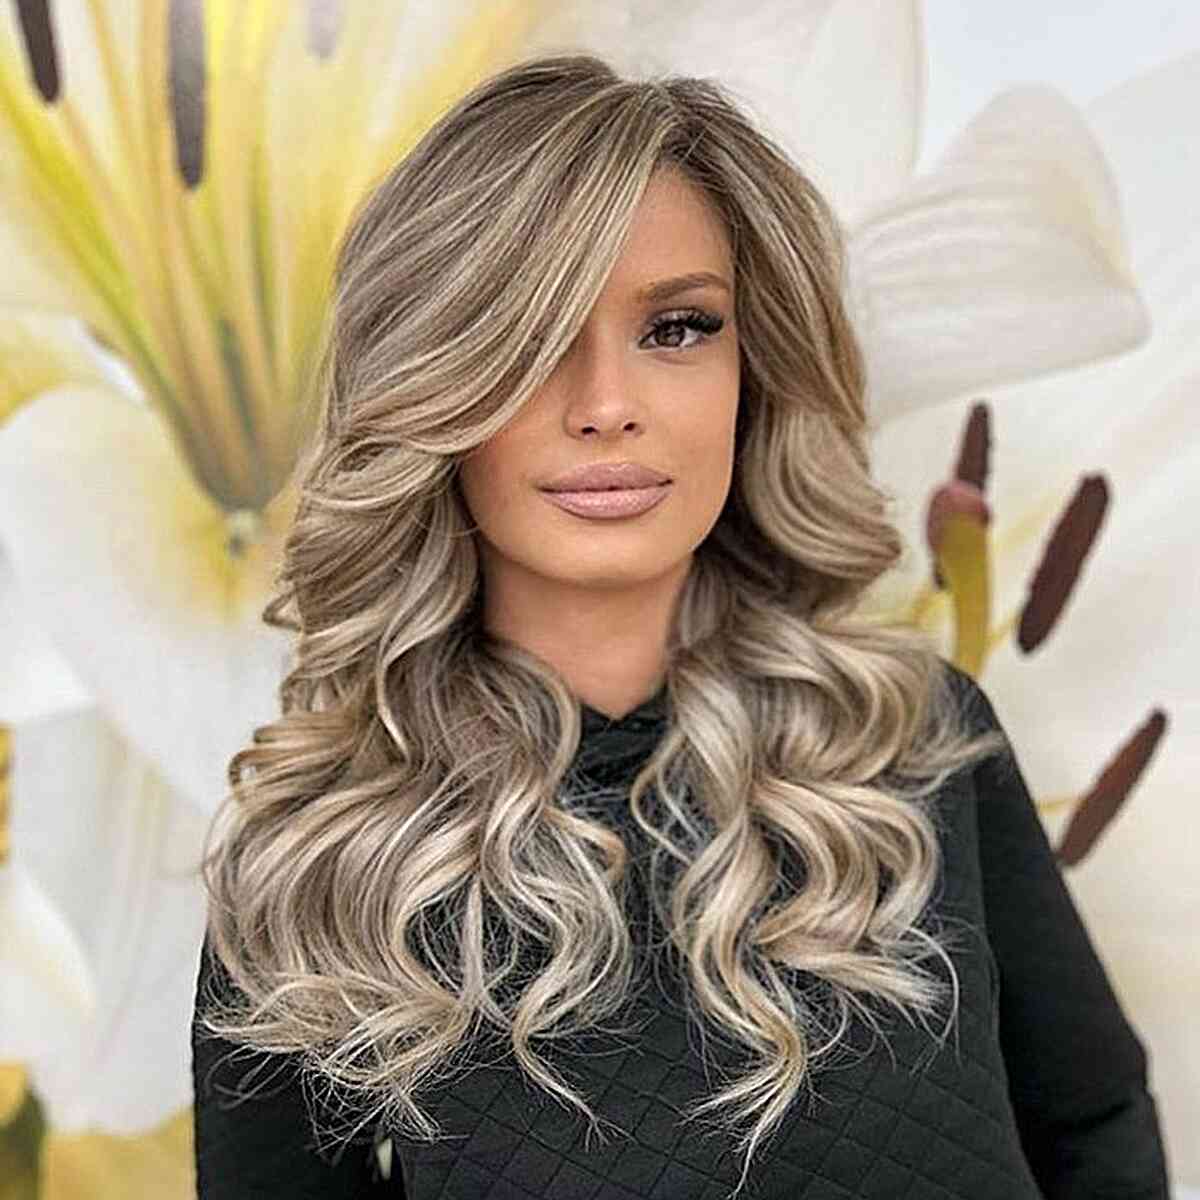 Swept Hairstyle for Ladies with Square Faces and long hair